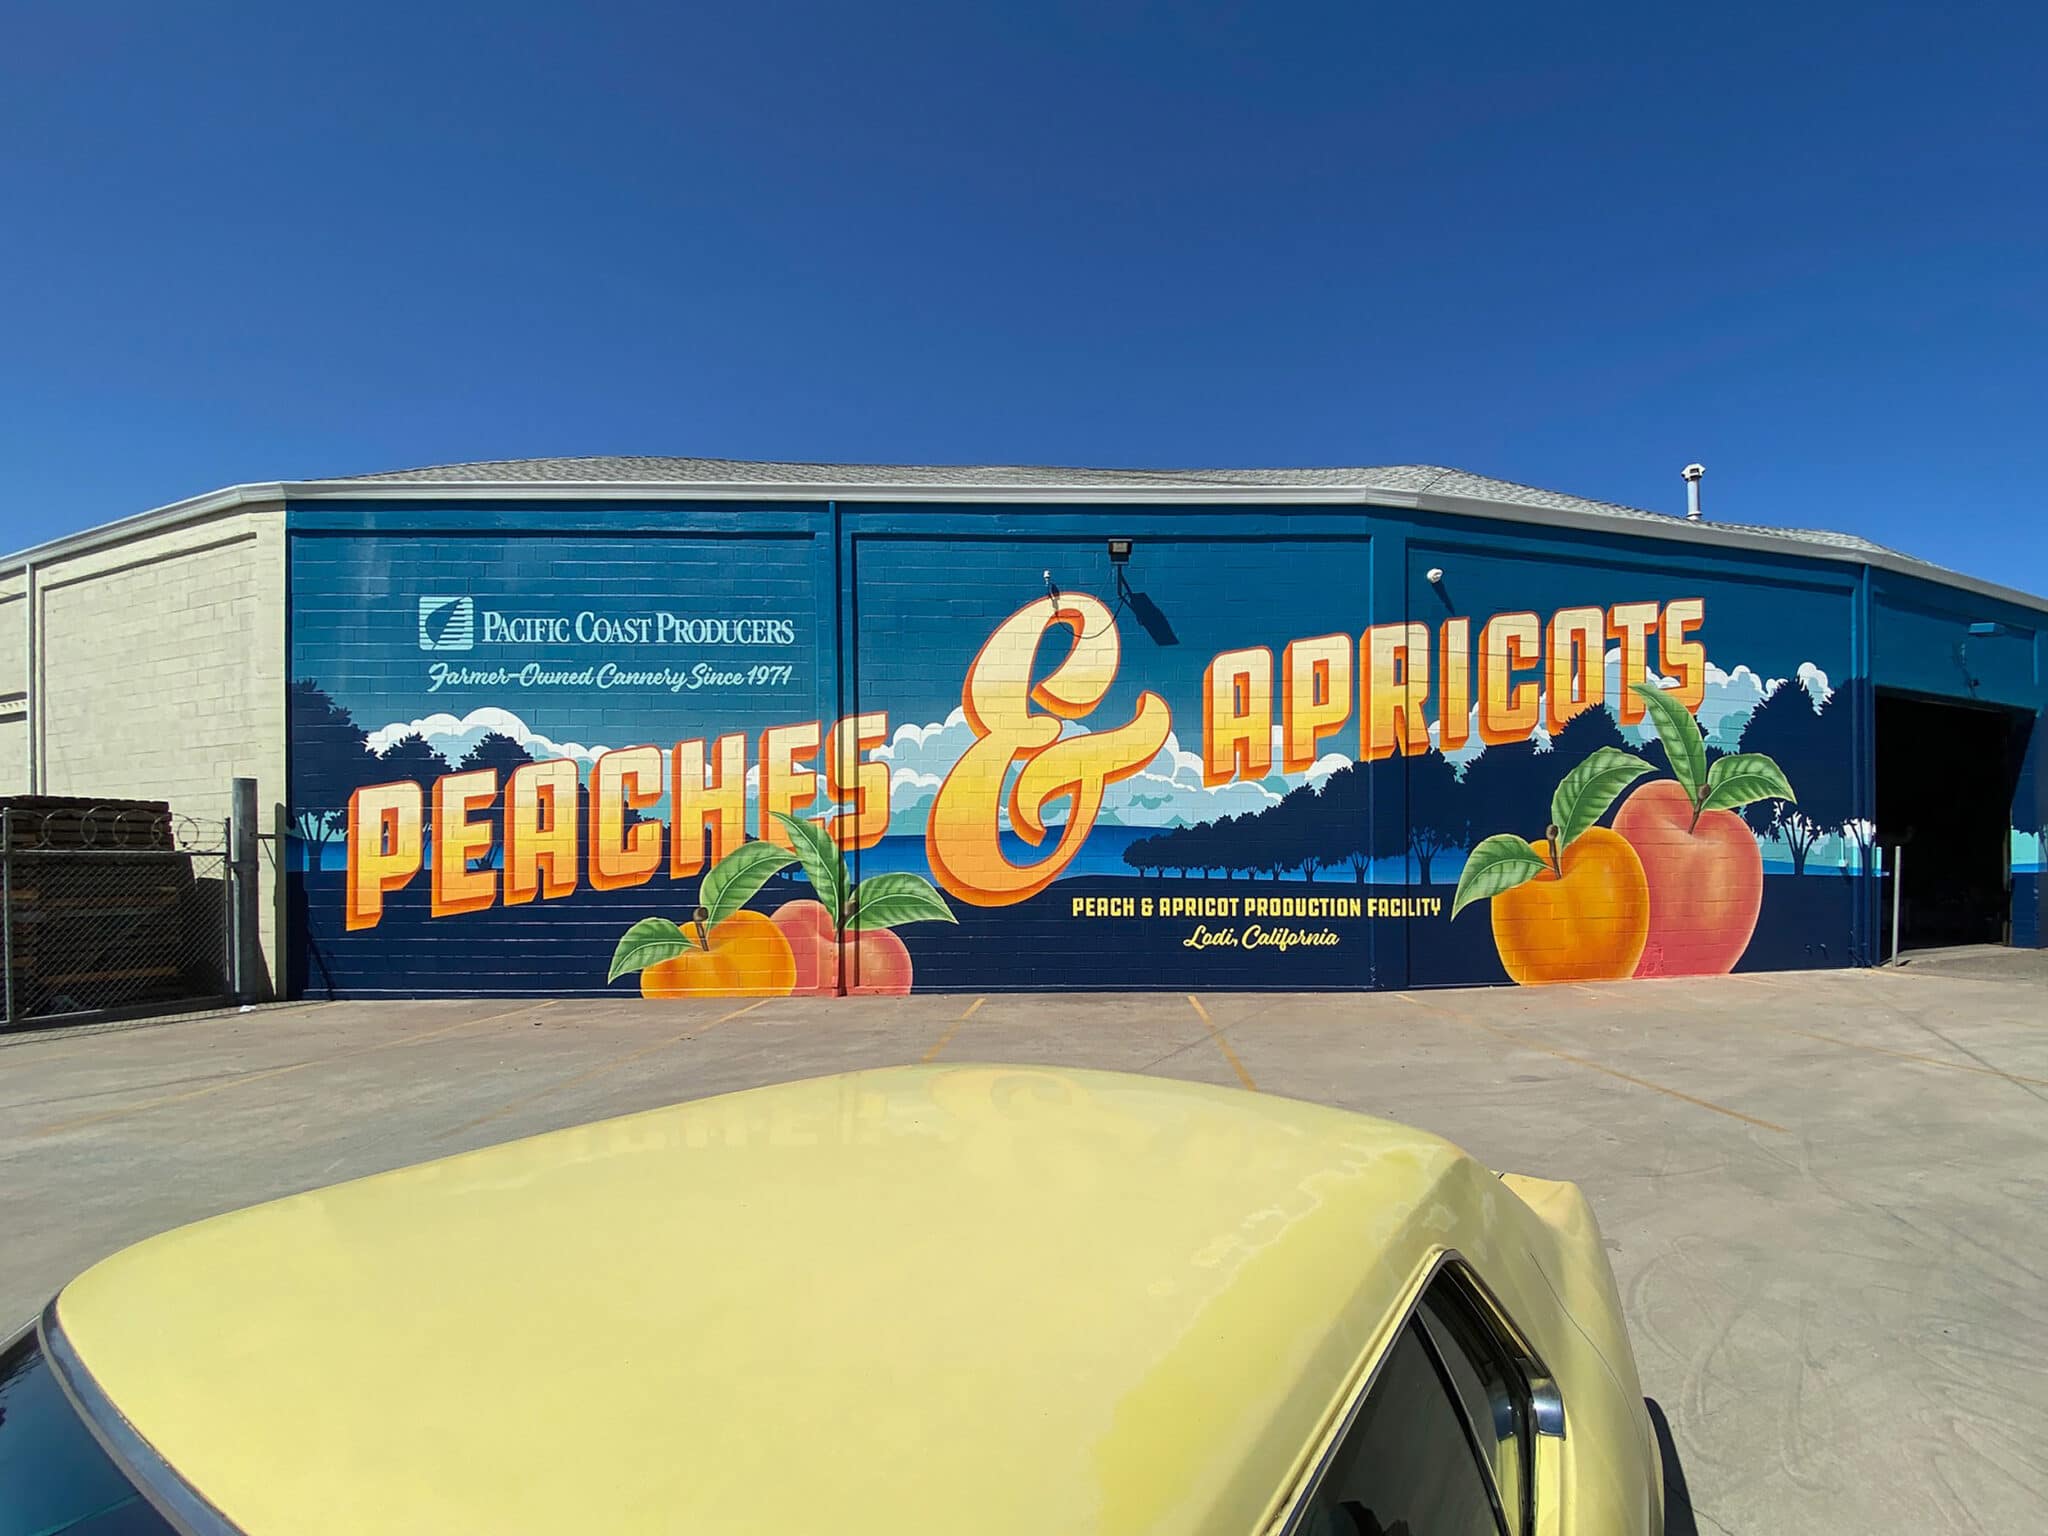 Mural depicting peaches and apricots, commissioned by Lodi plant cannery.